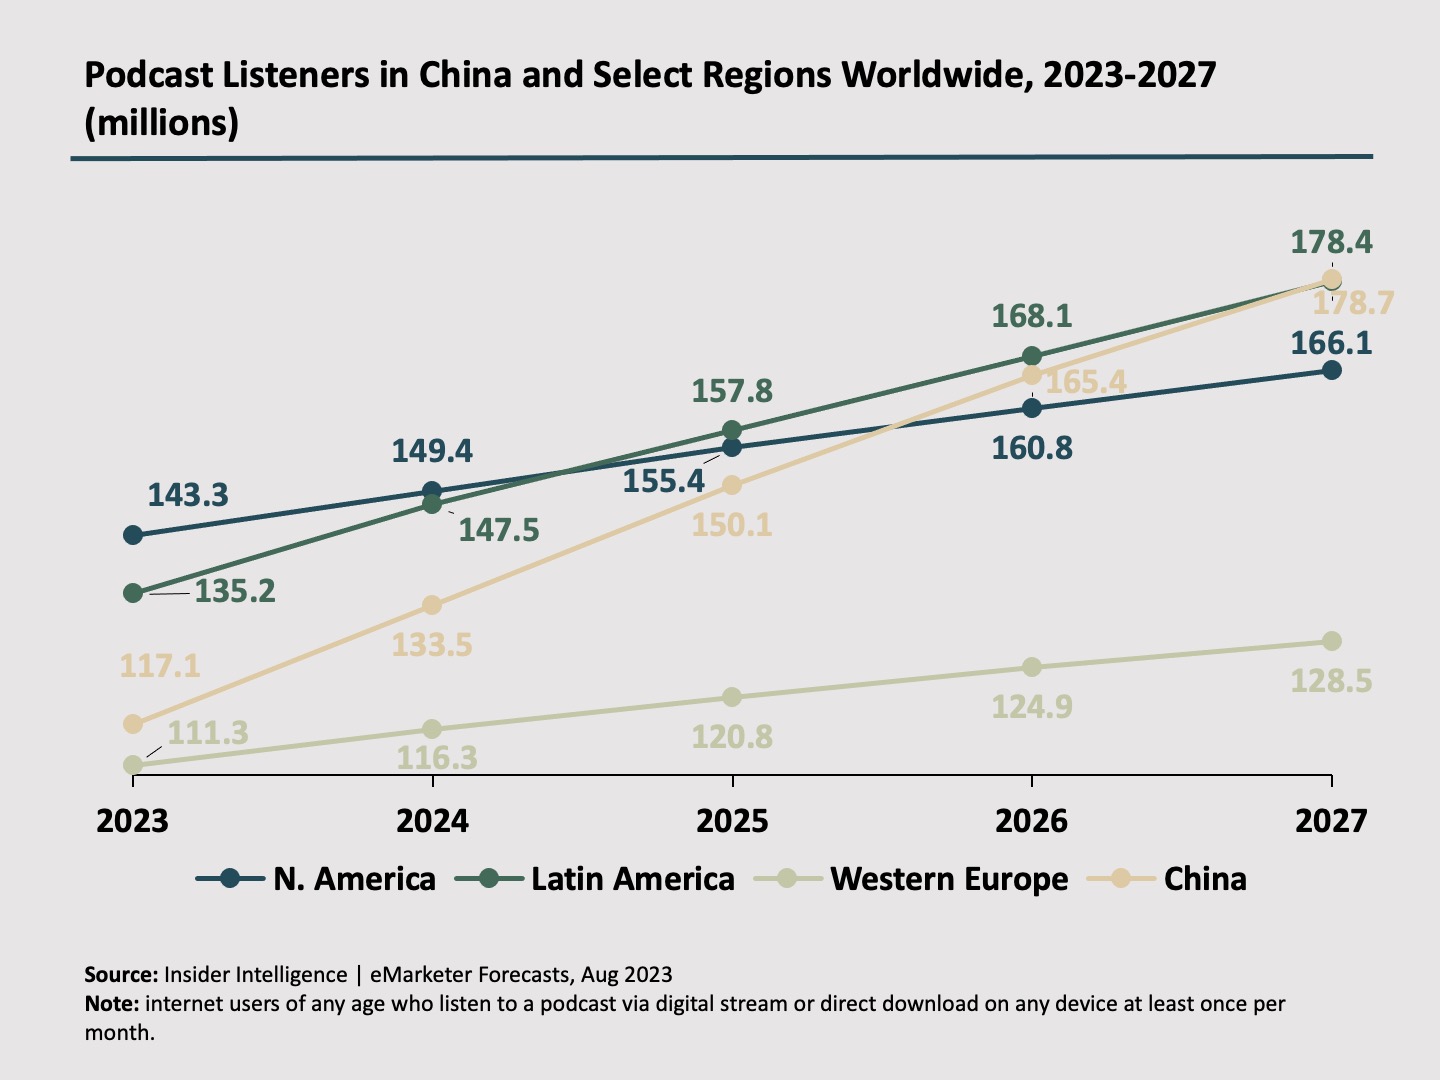 Listeners in China and select regions worldwide